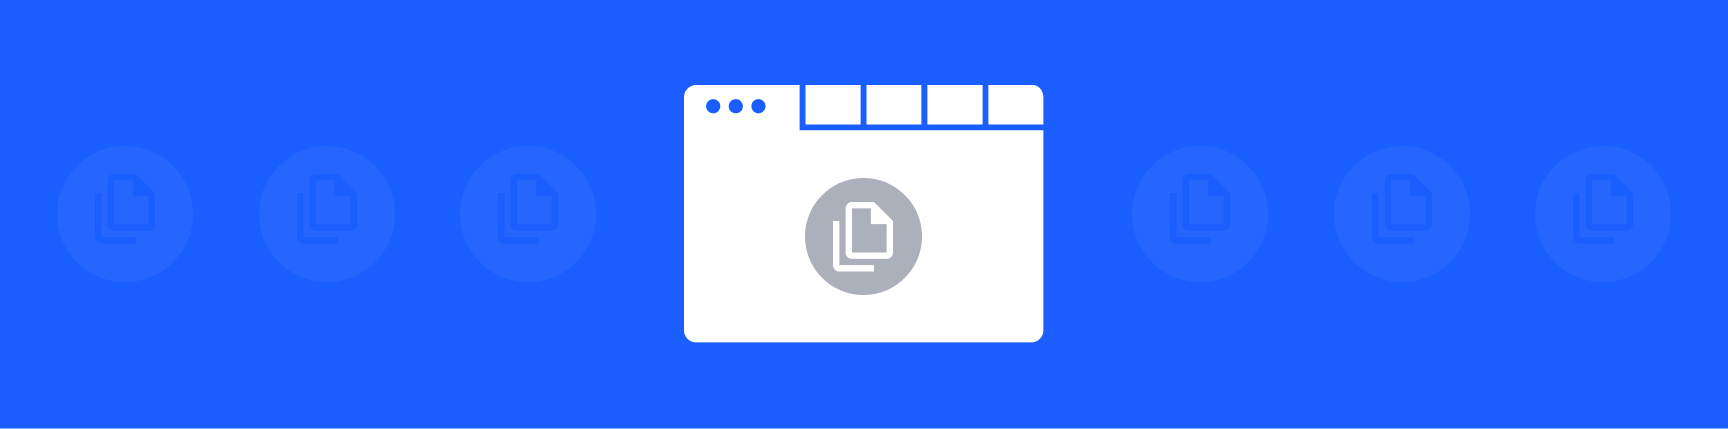 A white block with the Google Docs copy icon in the foreground, with a blue background